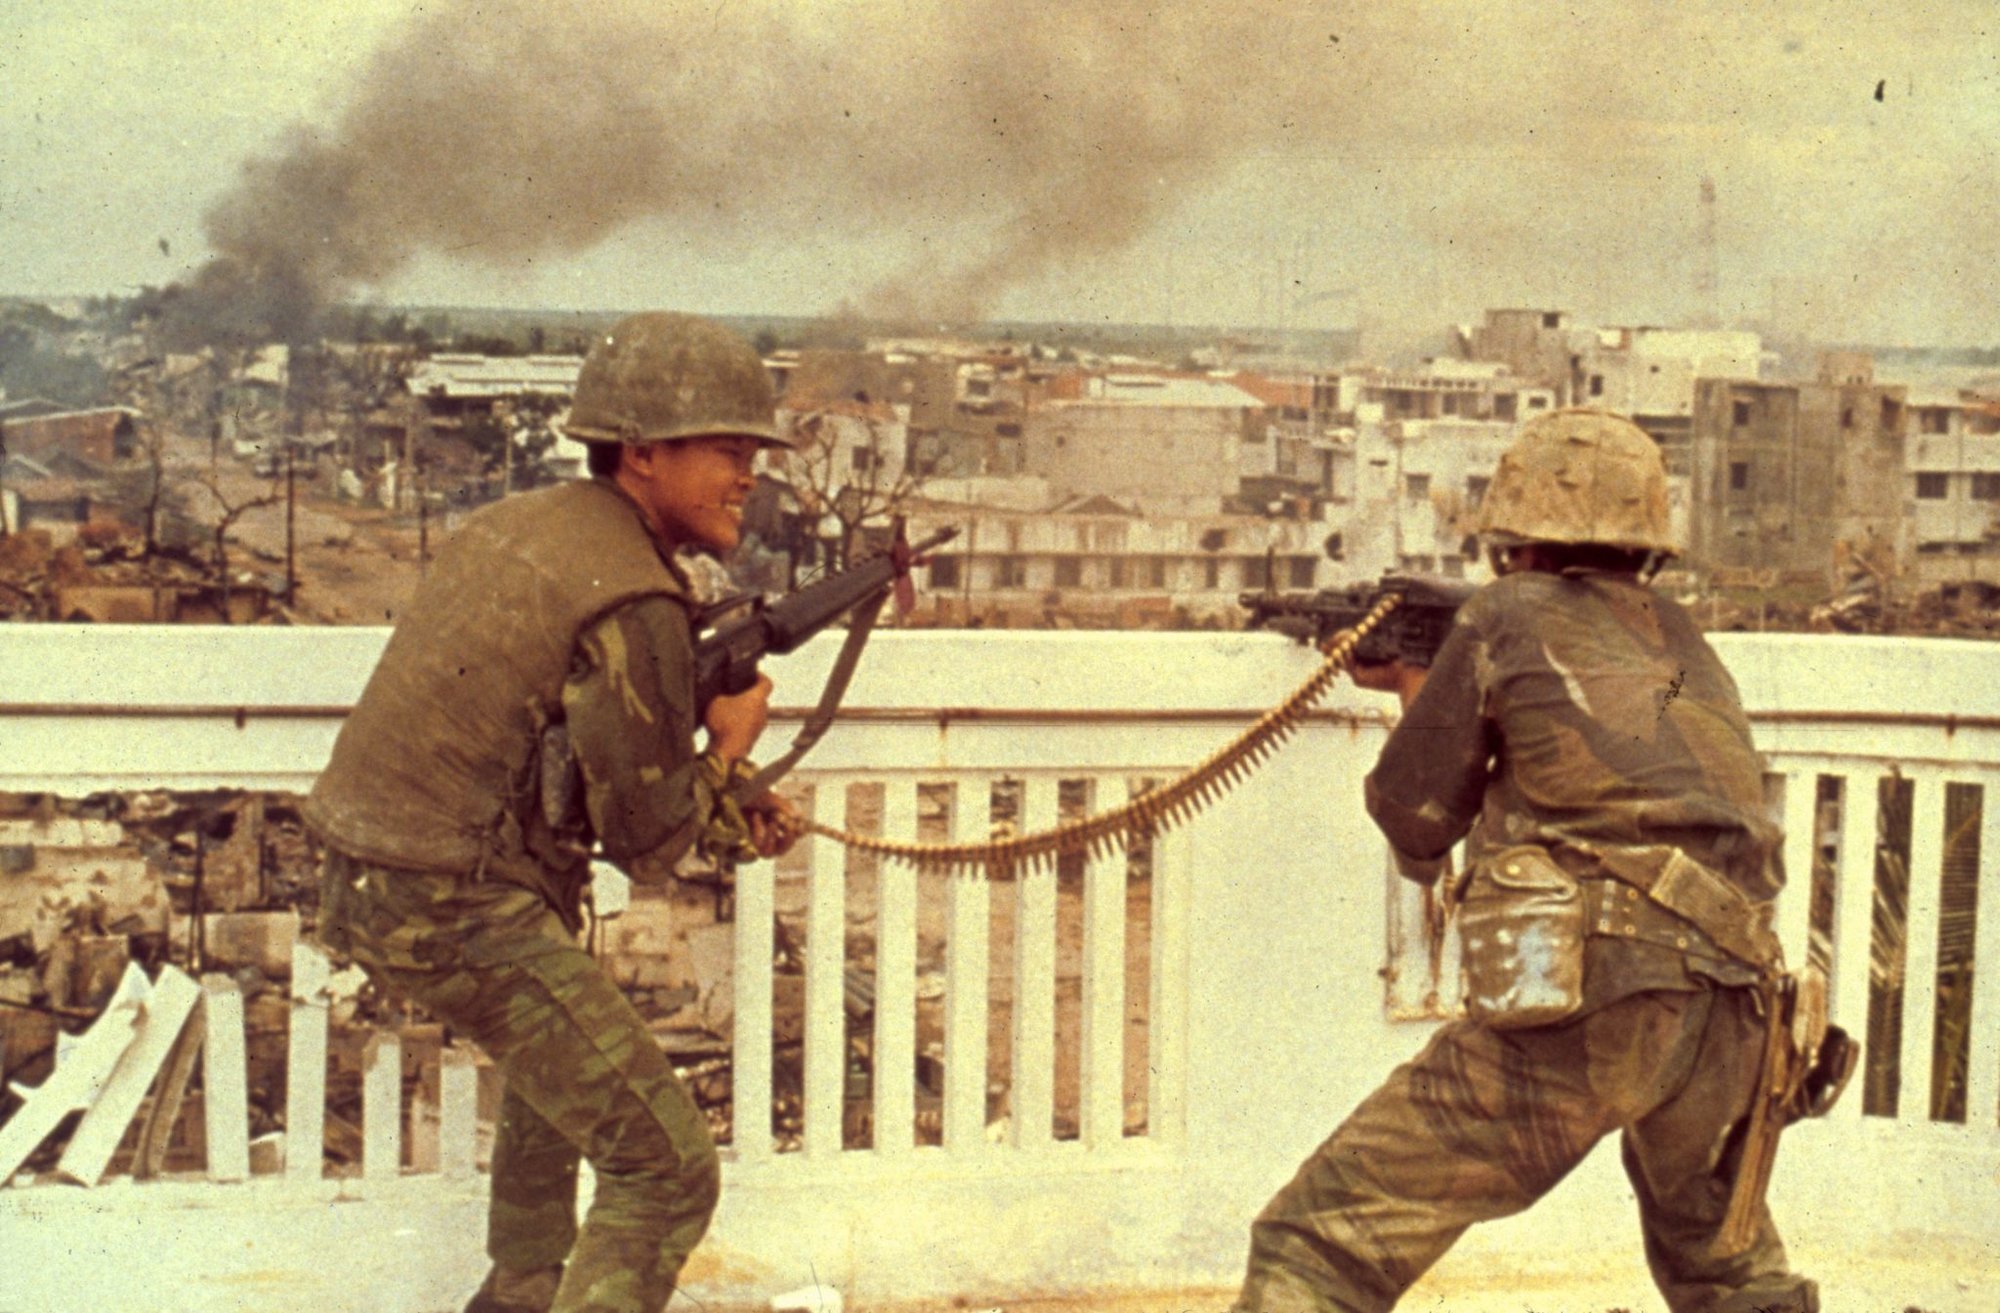 1968: South Vietnamese soldiers fighting in Saigon. (Photo by MPI/Getty Images)